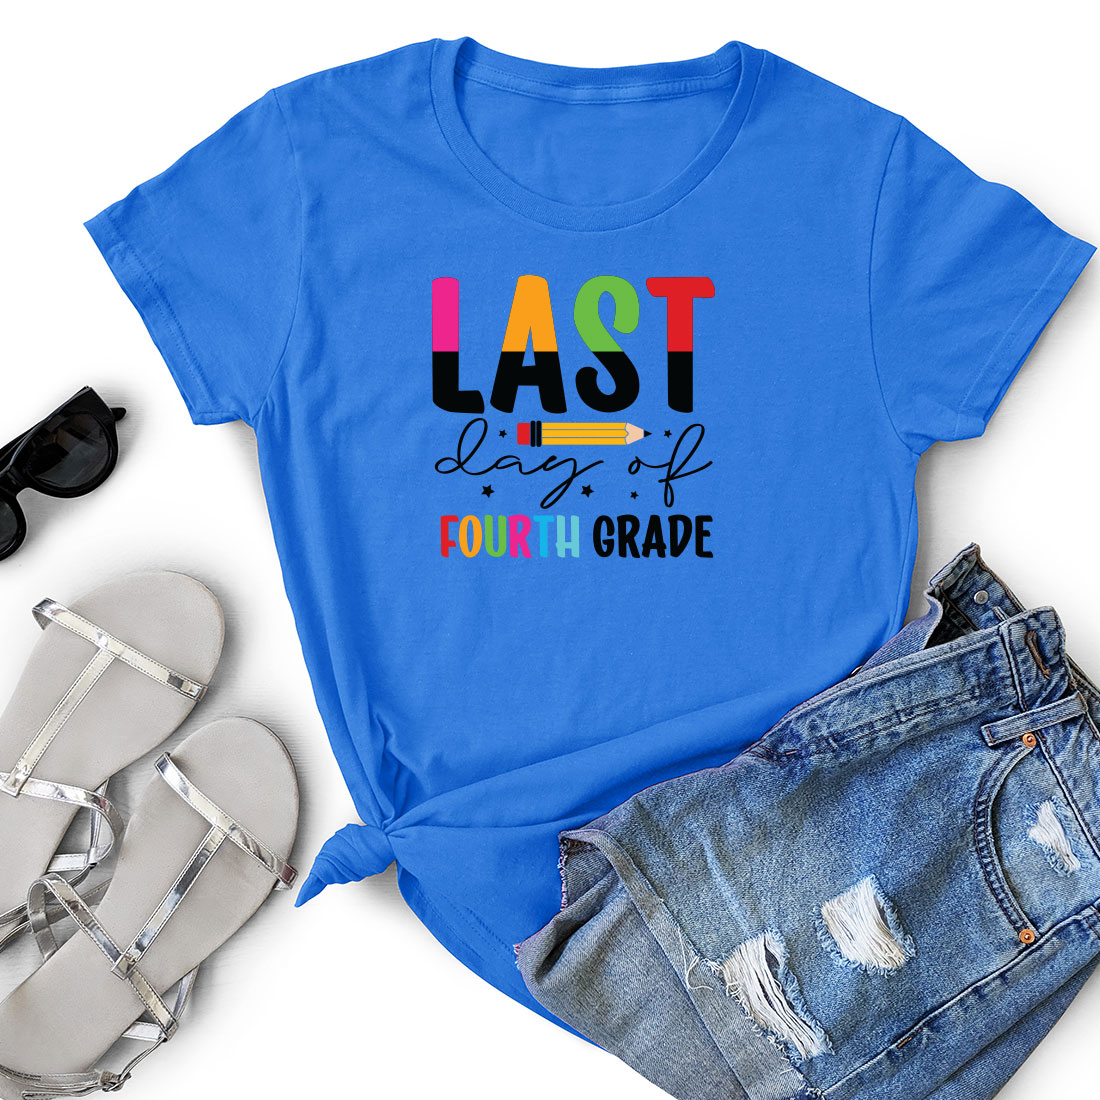 T - shirt that says last day of fourth grade next to a pair of.